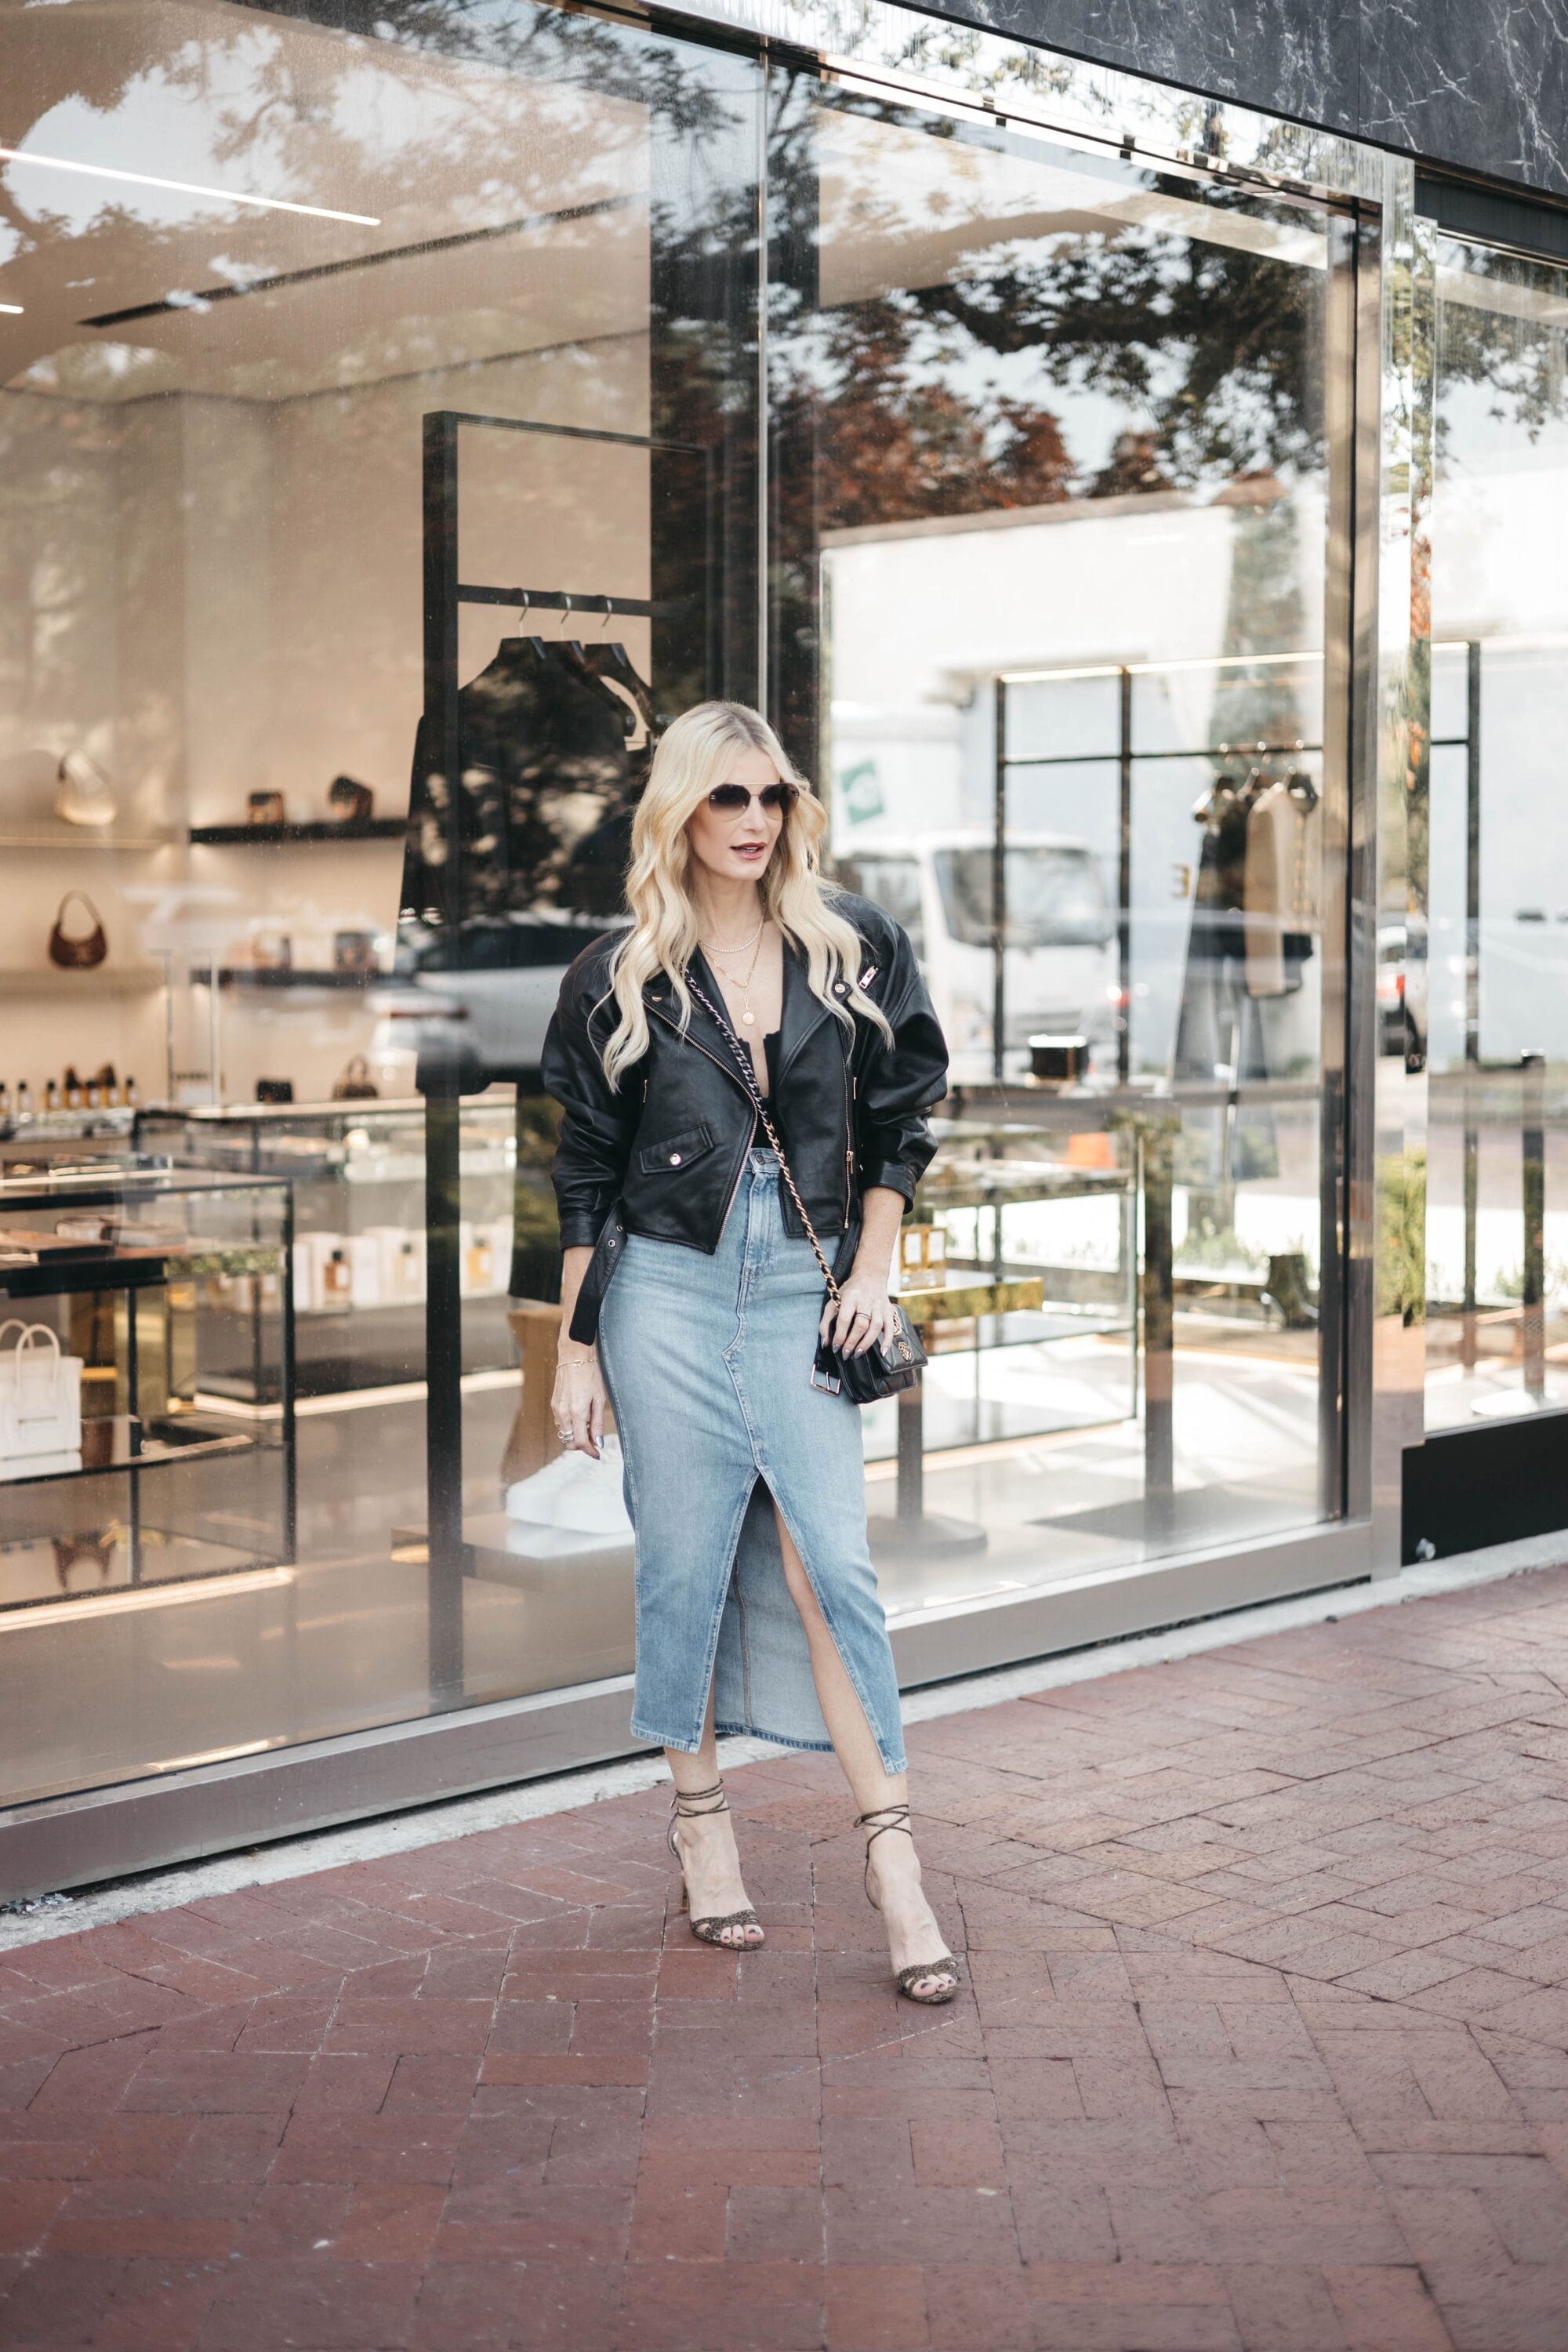 Over 40 Dallas fashion stylist wearing black leather jacket with denim midi skirt as 2 of the top 10 items part of the Saks friends and family sale.